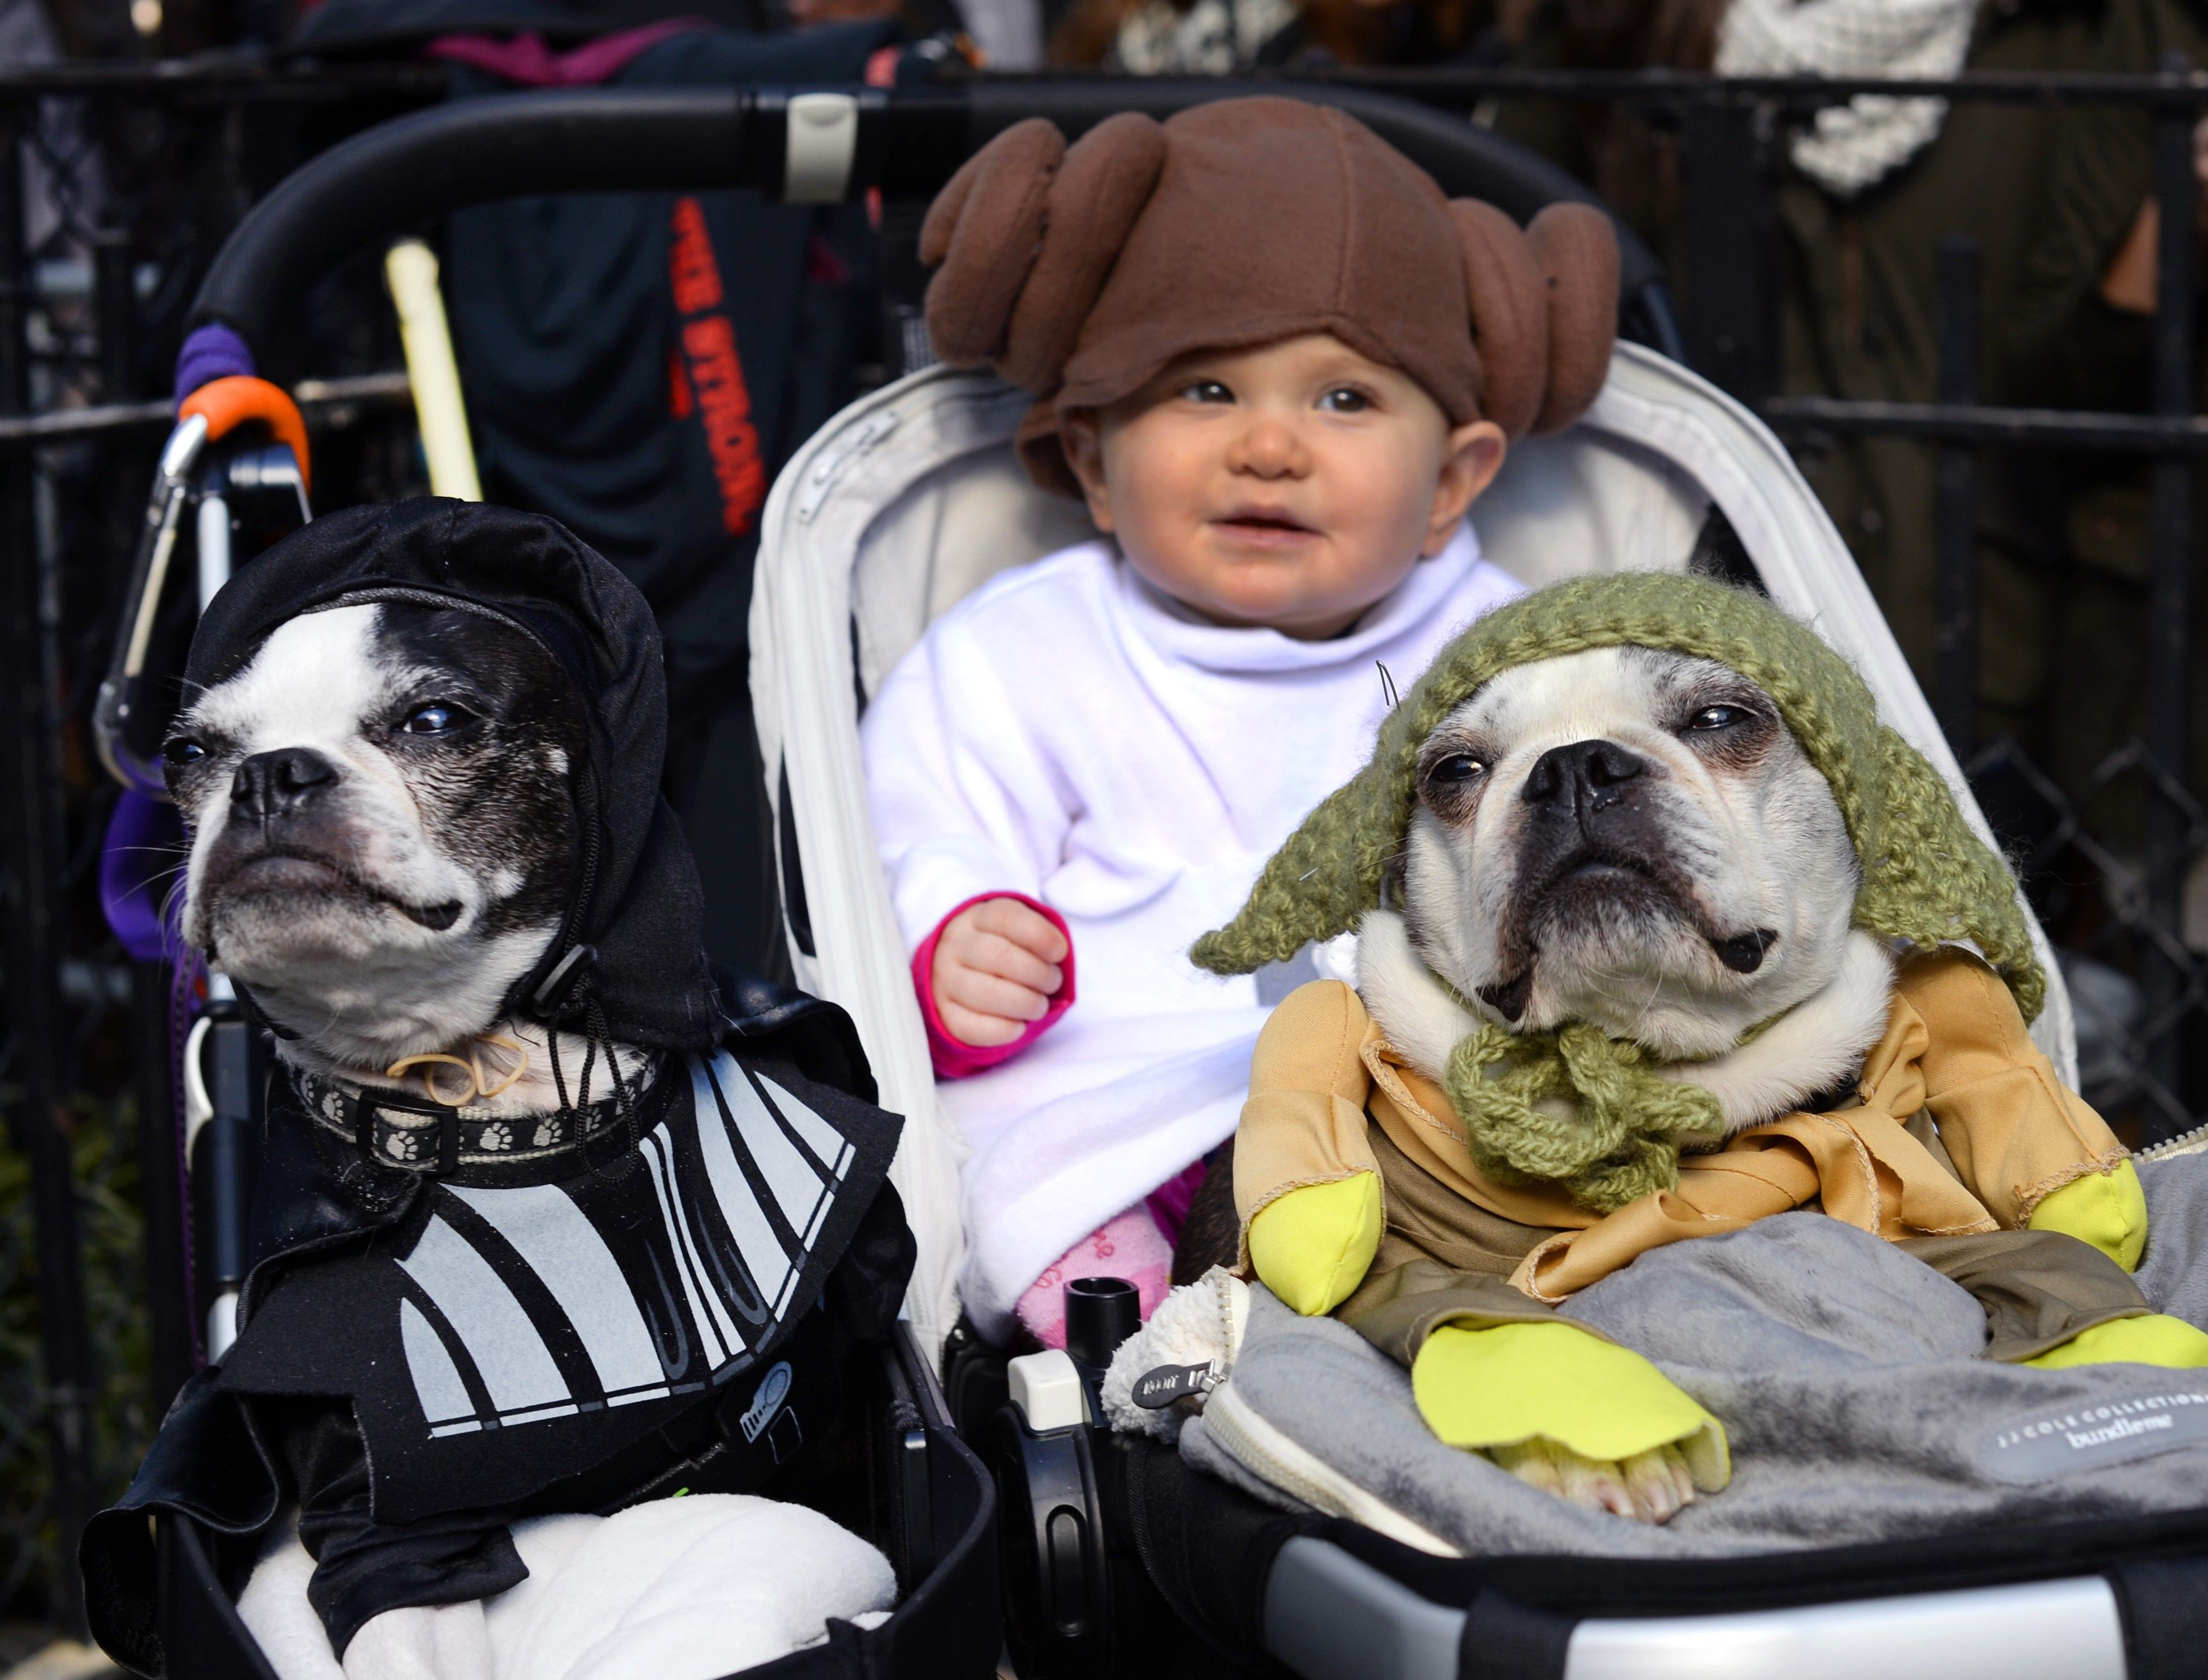 baby and dog halloween costumes